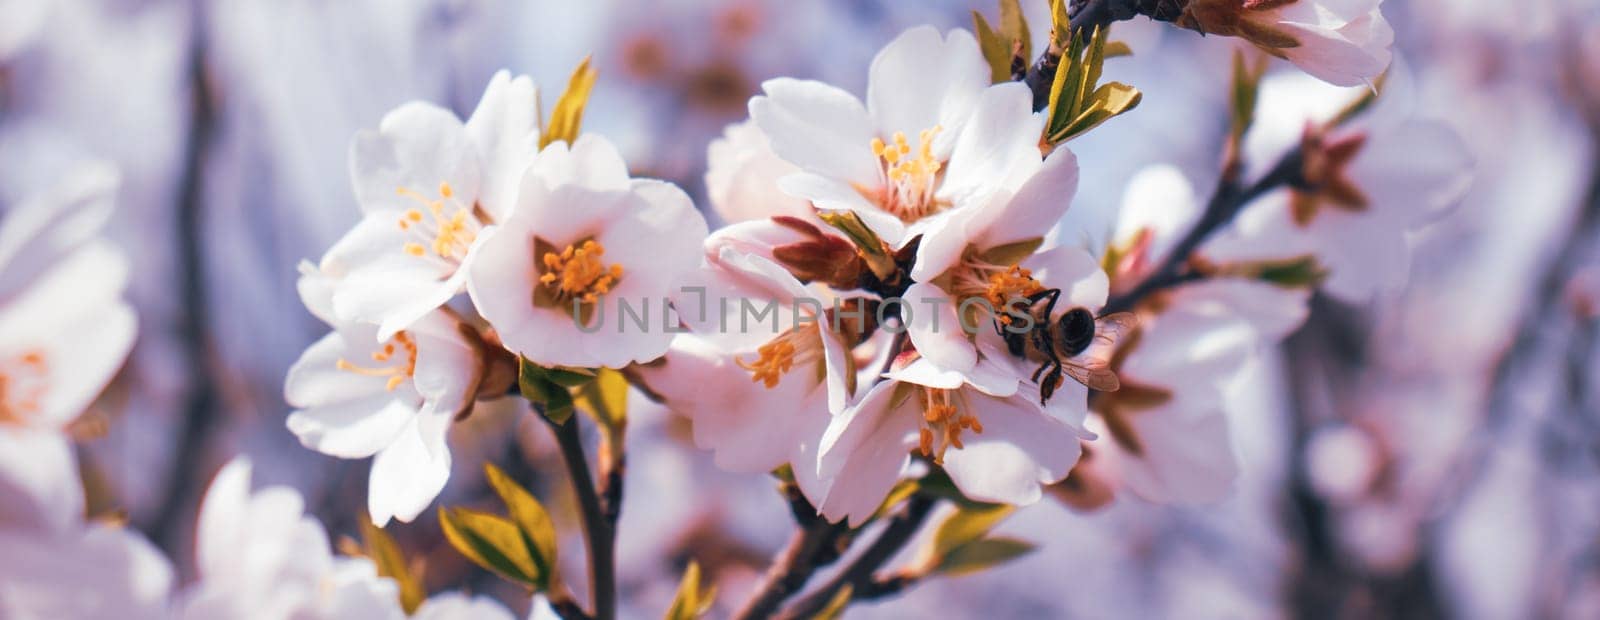 Close up blooming white apricot on tree photo. Blossom festival in spring with eating bee. Photography with blurred background. High quality picture for wallpaper